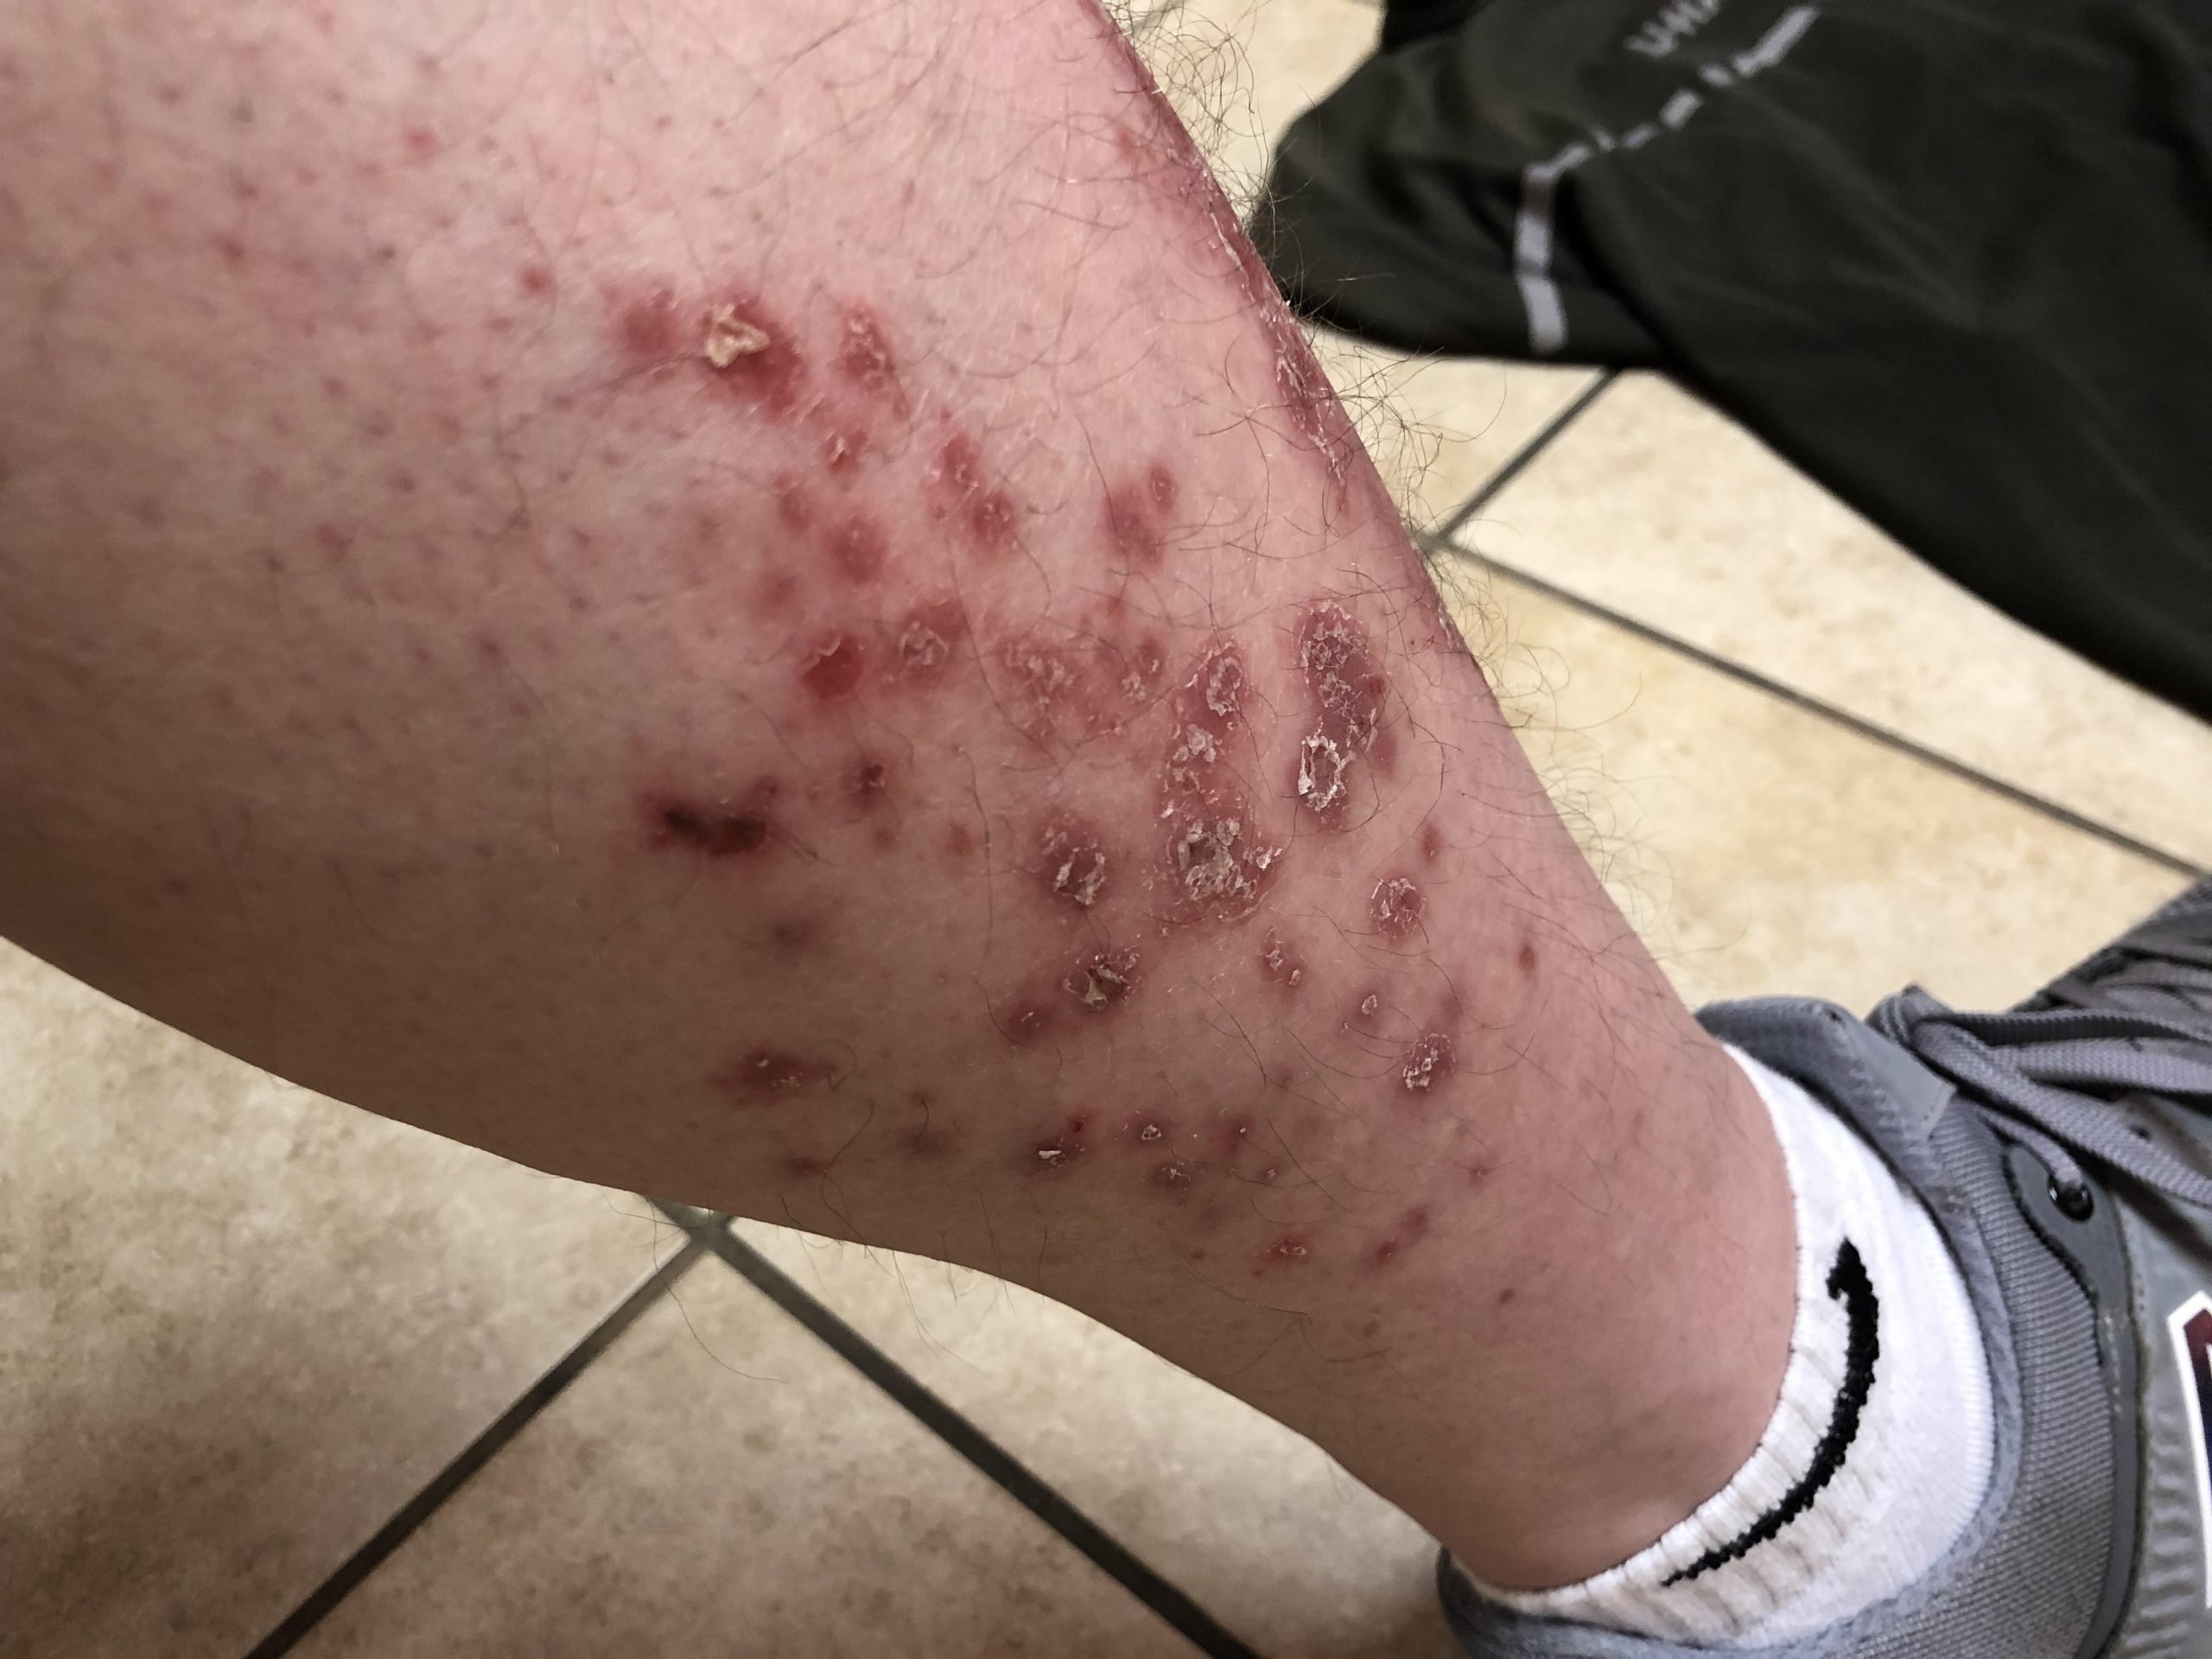 New flair up with numbness? : Psoriasis